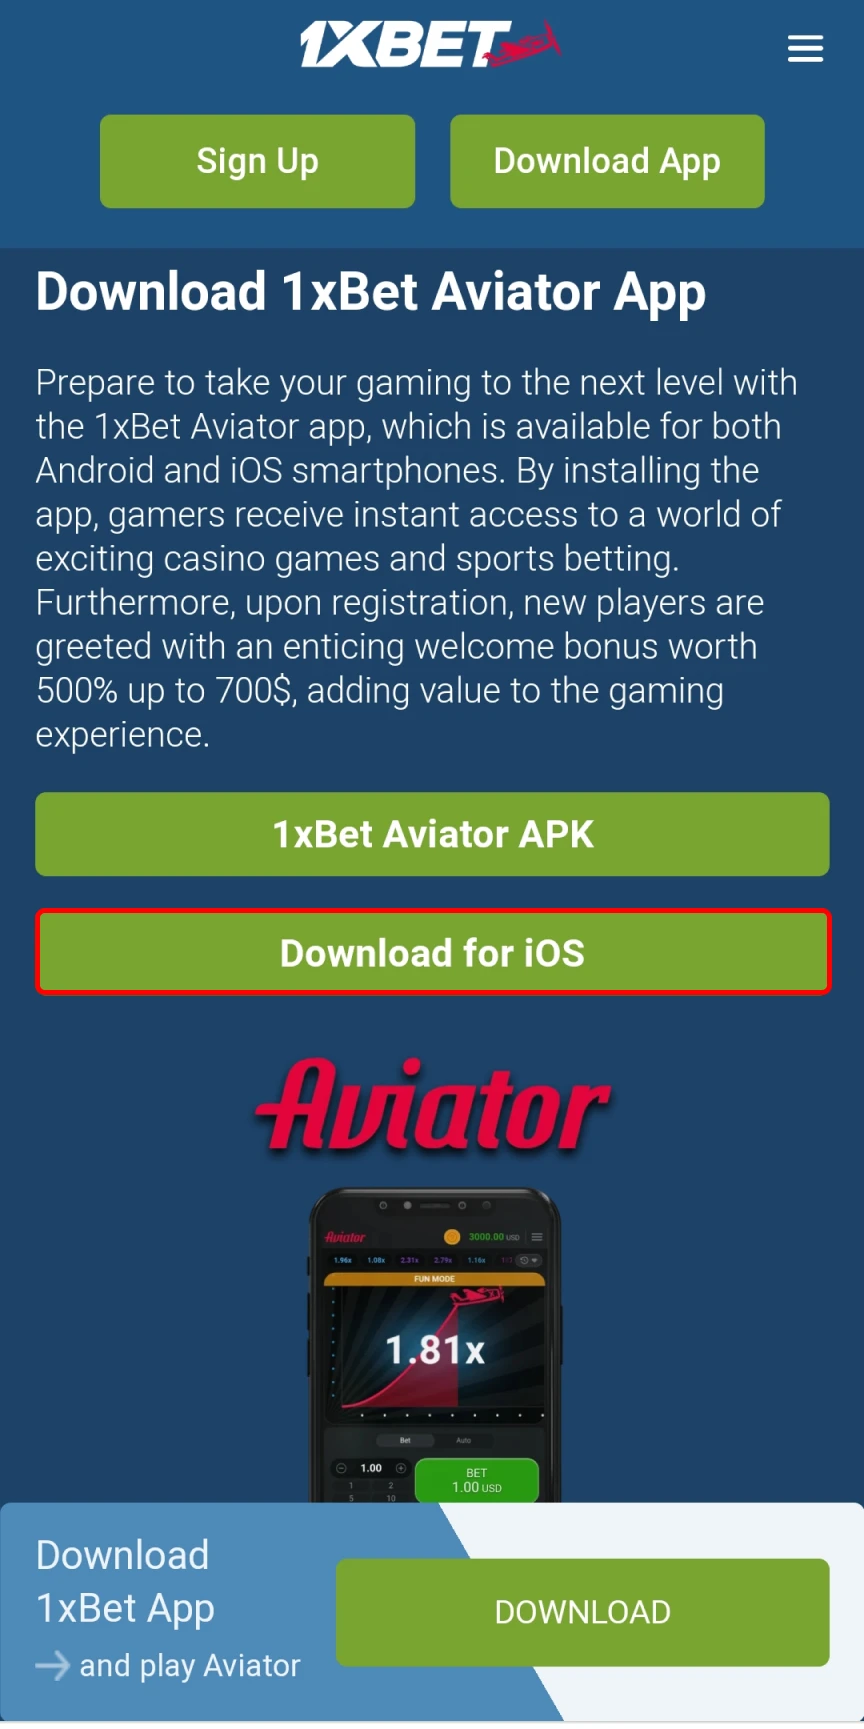 Visit the official 1xbet website to download Aviator on iOS.